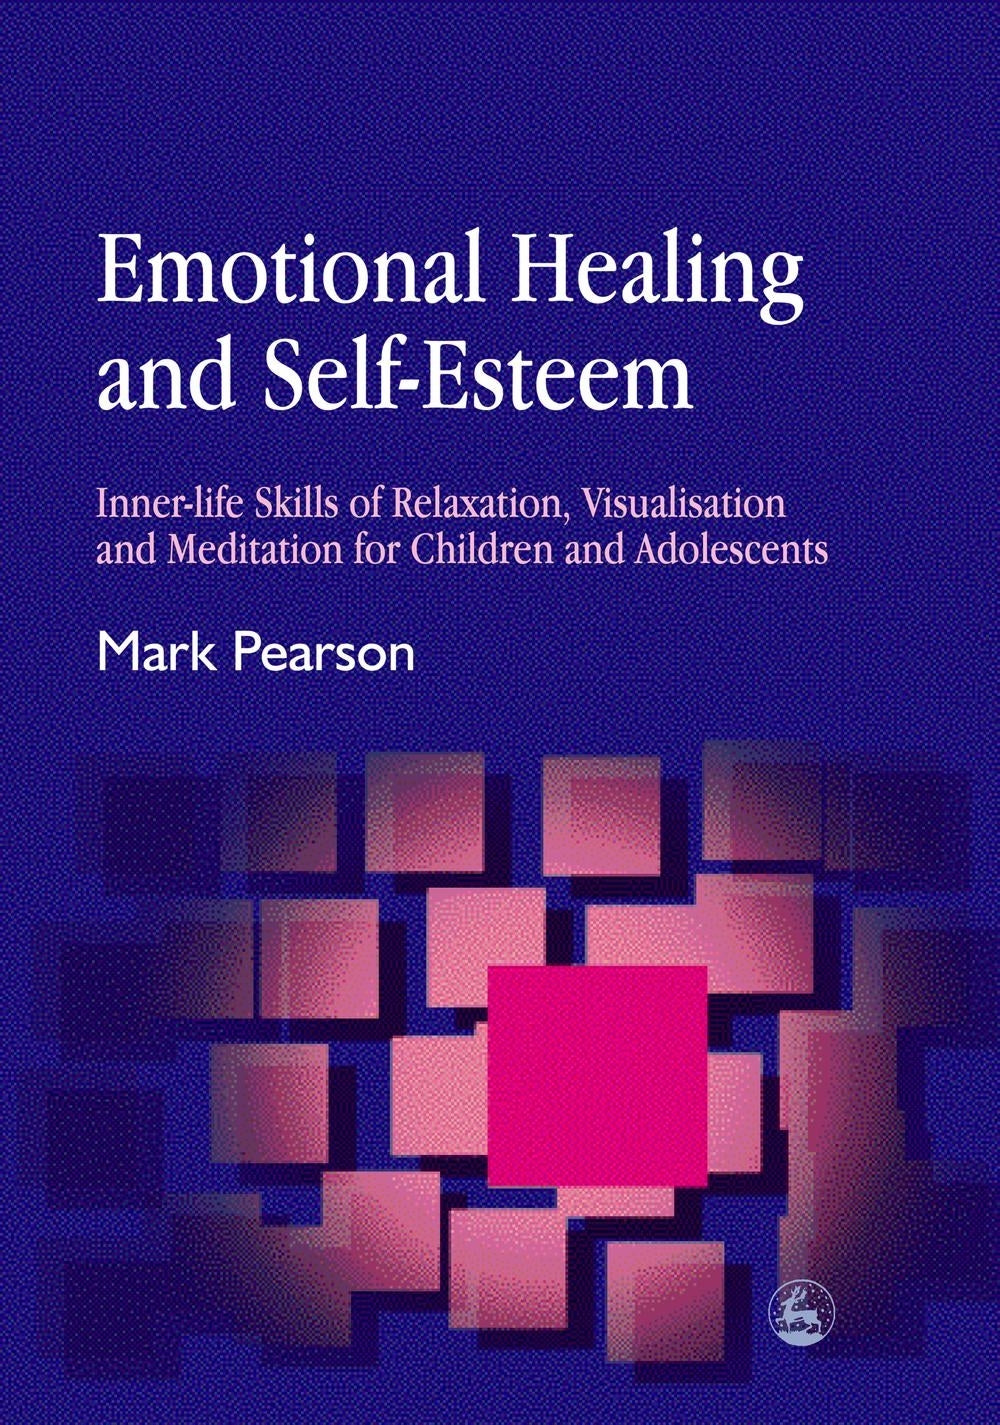 Emotional Healing and Self-Esteem by Mark Pearson